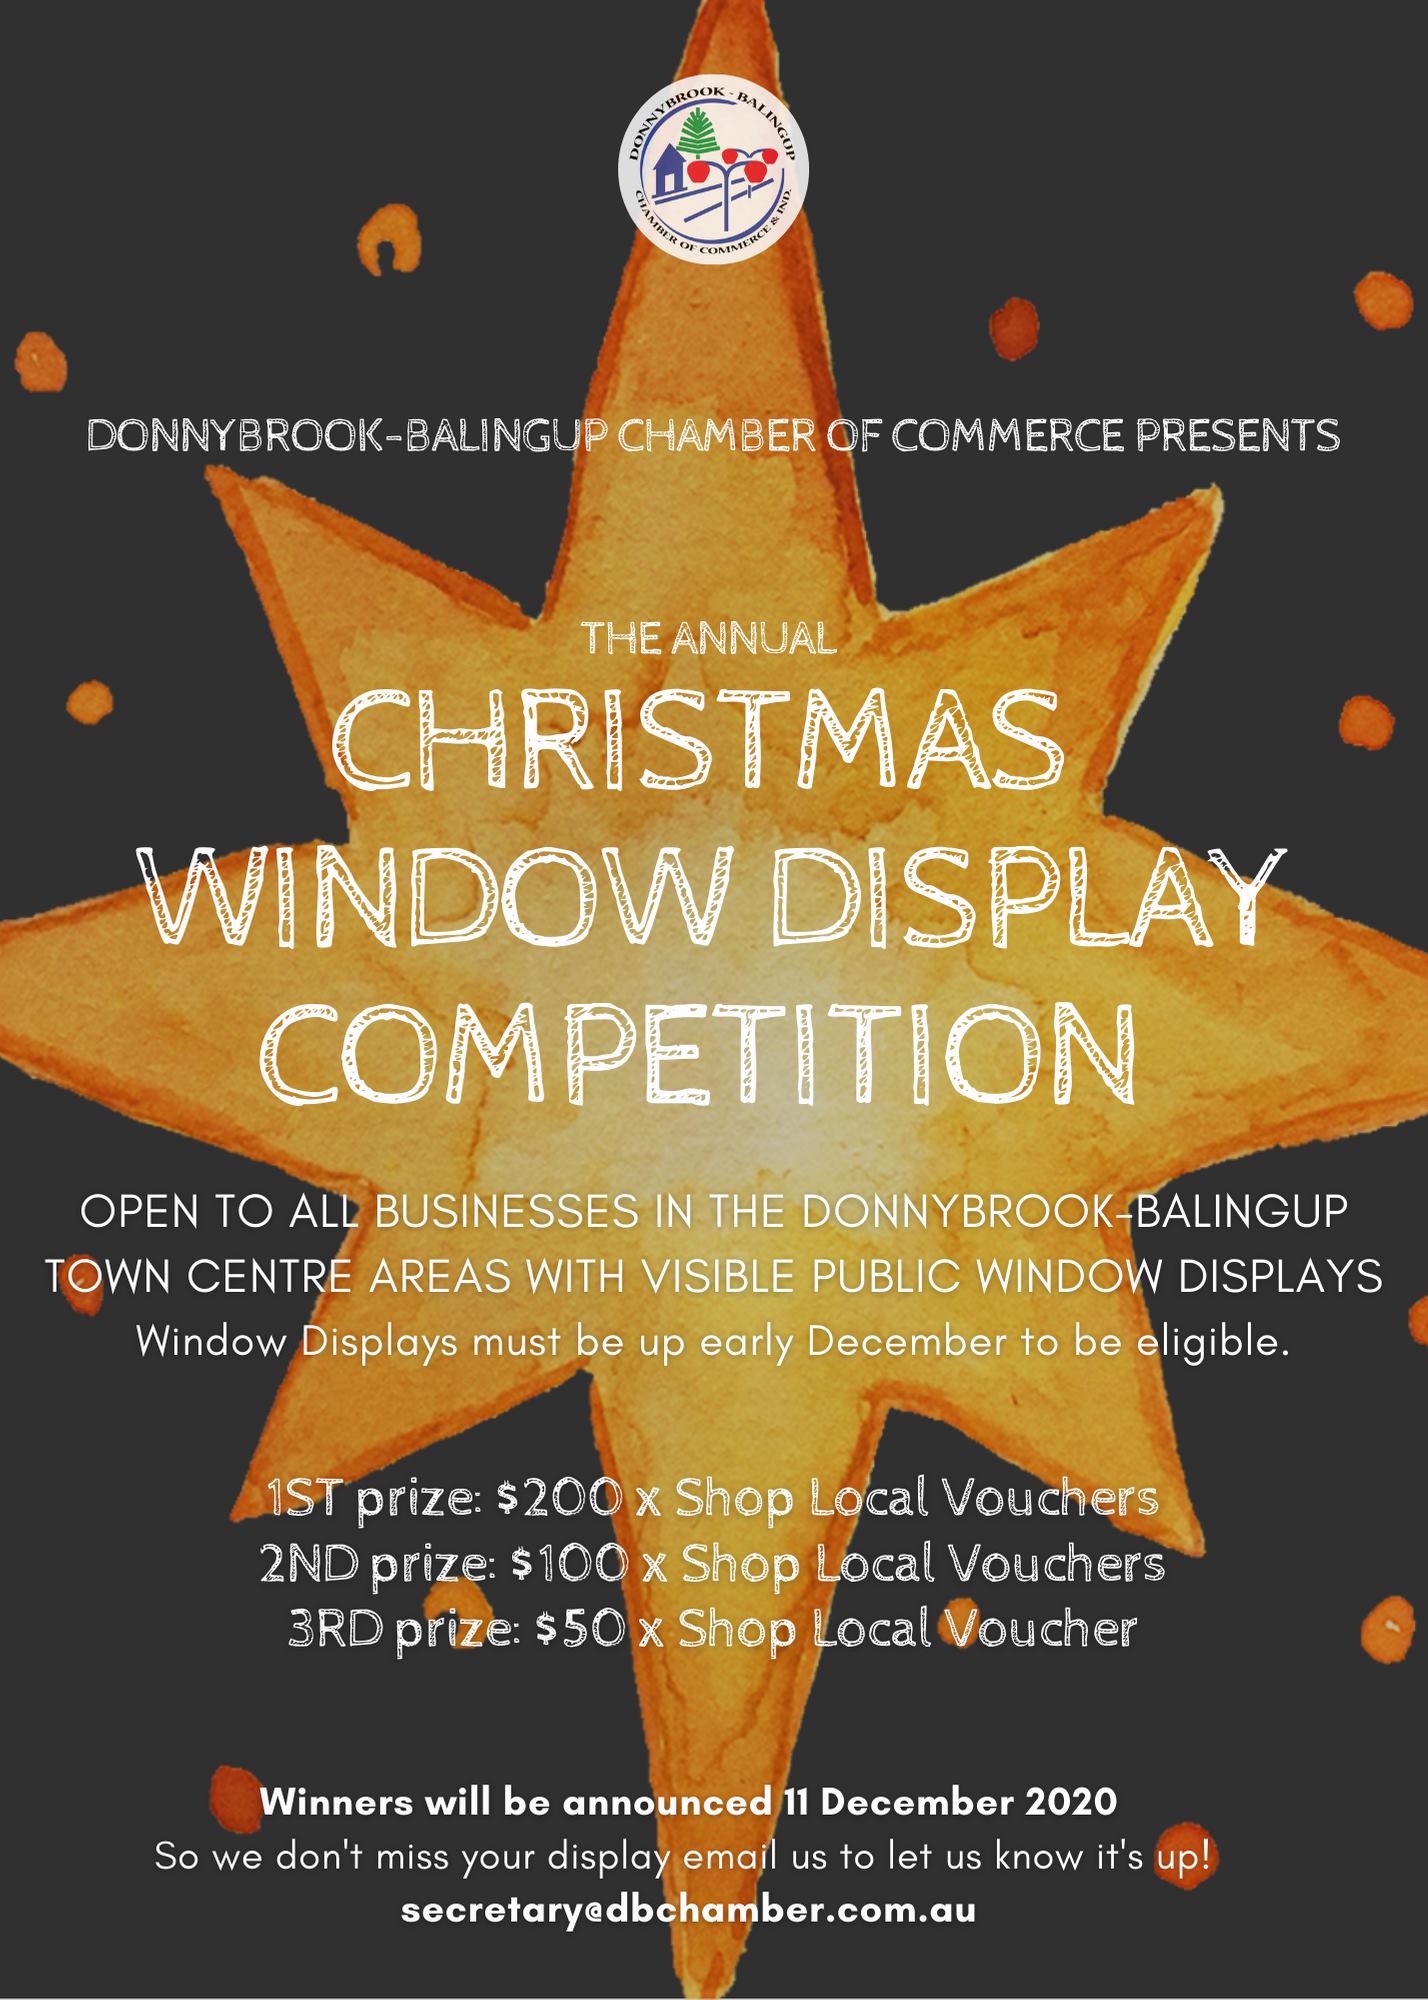 Competition - Donnybrook Balingup Chamber of Commerce